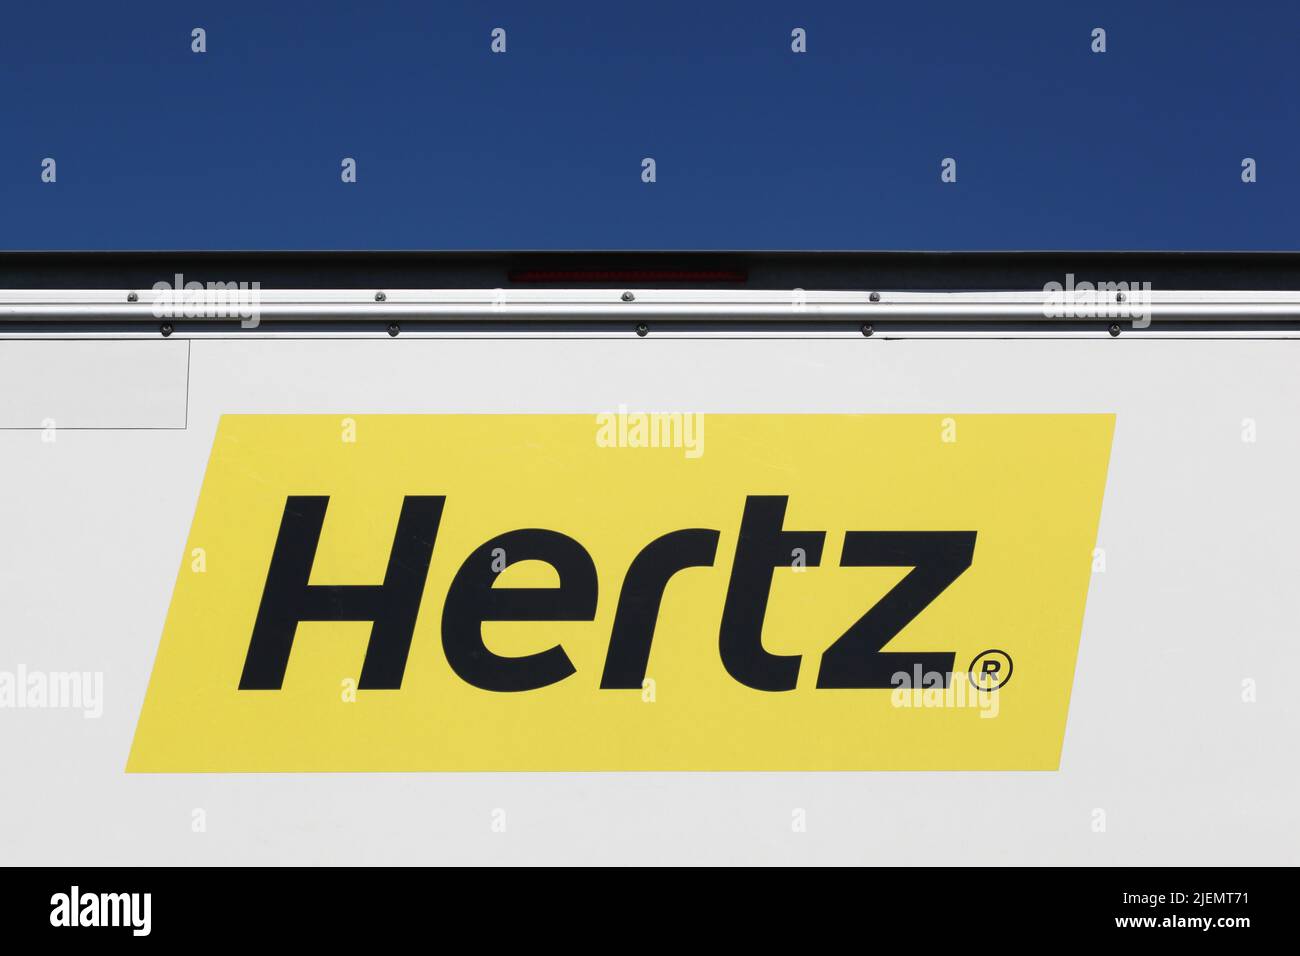 Villefranche sur Saone, France - May 17, 2020: Hertz logo on a truck. Hertz is an American car rental company Stock Photo